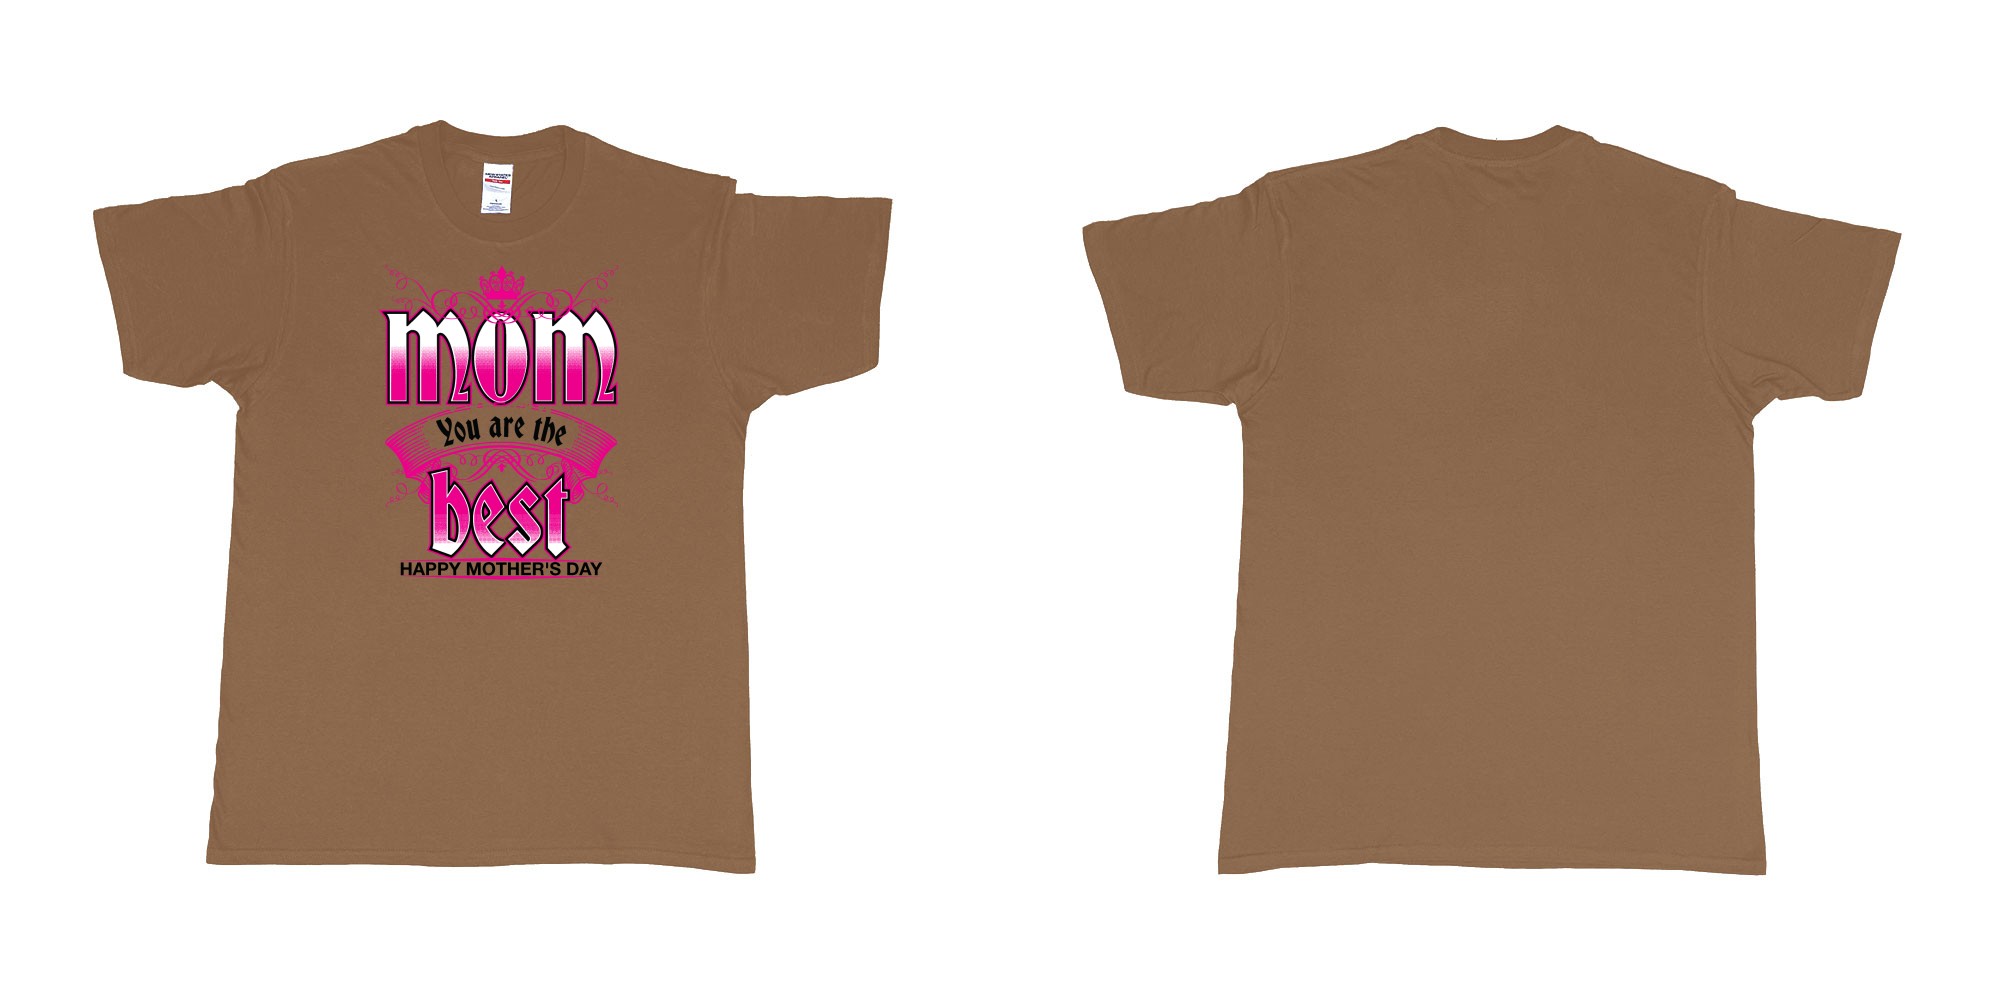 Custom tshirt design crown mom you are the best happy morthers day in fabric color chestnut choice your own text made in Bali by The Pirate Way